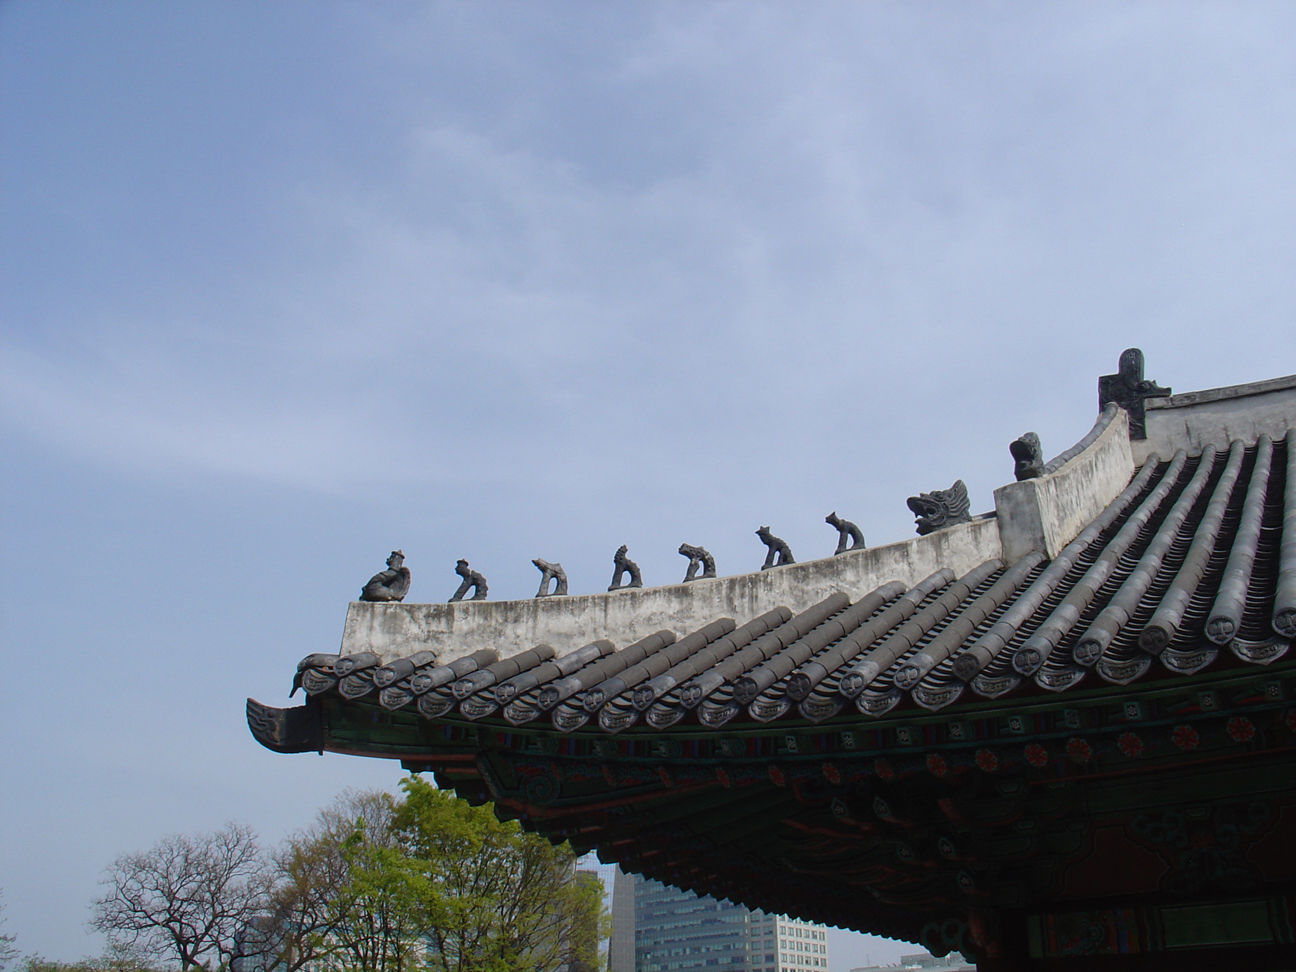 Roof decoration of Kyung-Hee-Geung Palace.